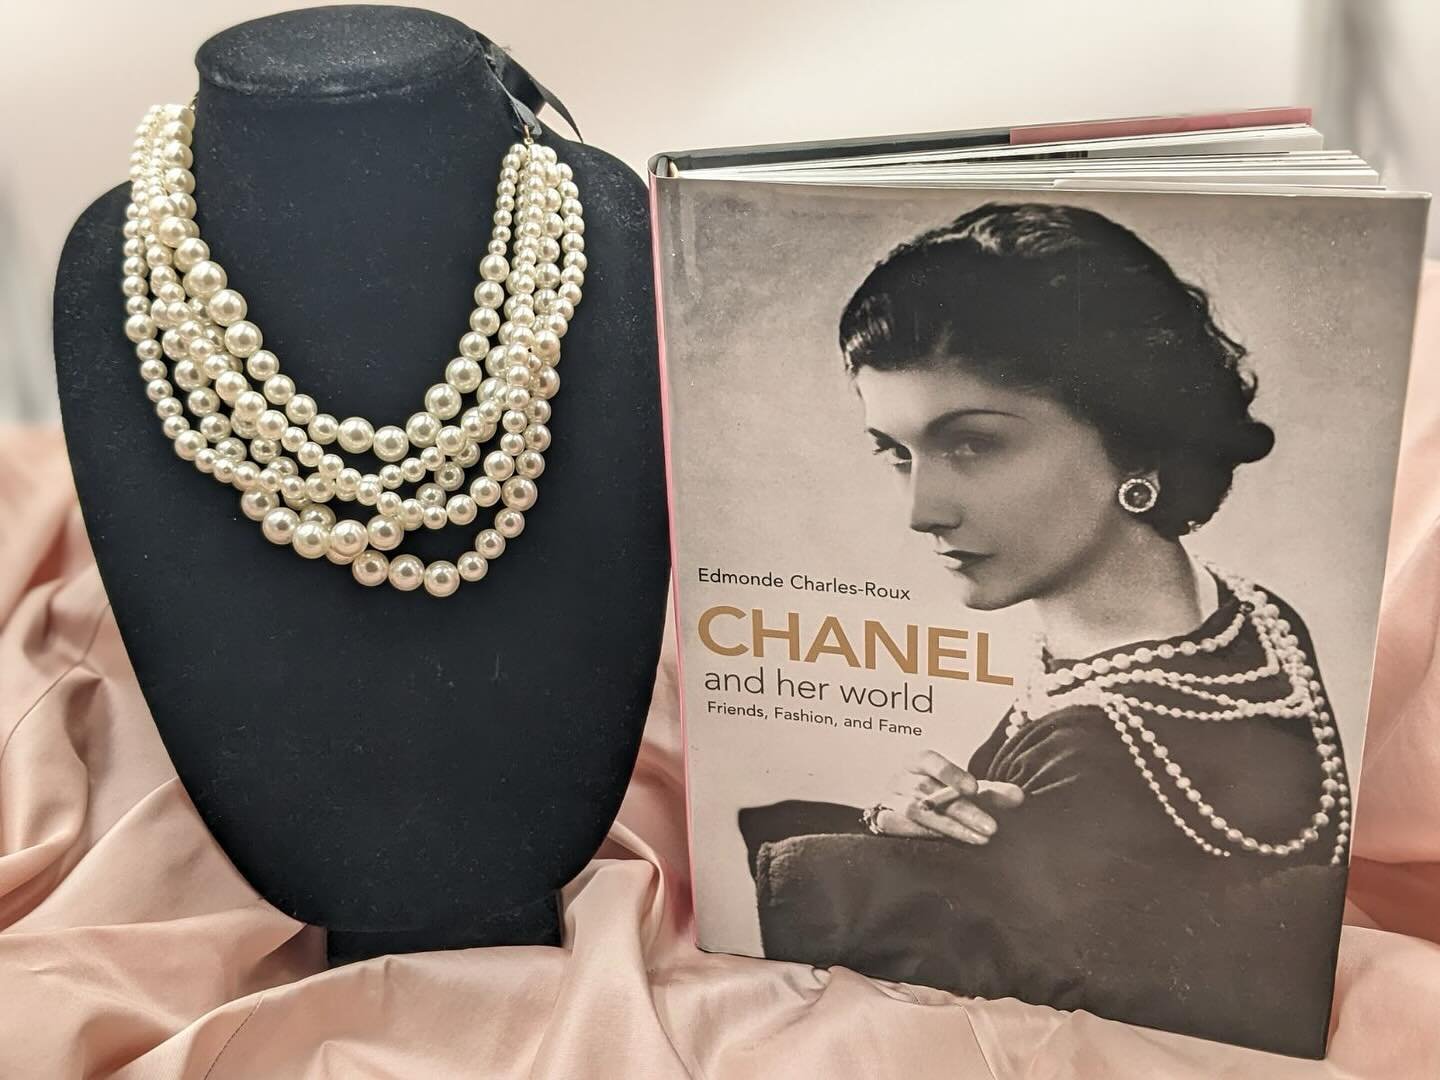 &ldquo;Pearls will make you glow like moonlight&rdquo;- Coco Chanel

#pearljewelry #chanelvibes #vintage #vintagegirlies #classicstyle #comothriftshop #comothriftshopfinds #thrifted #thrifthaul #thrifthappy #shoplocal #shopstoningtonct #ctthrift #ctt